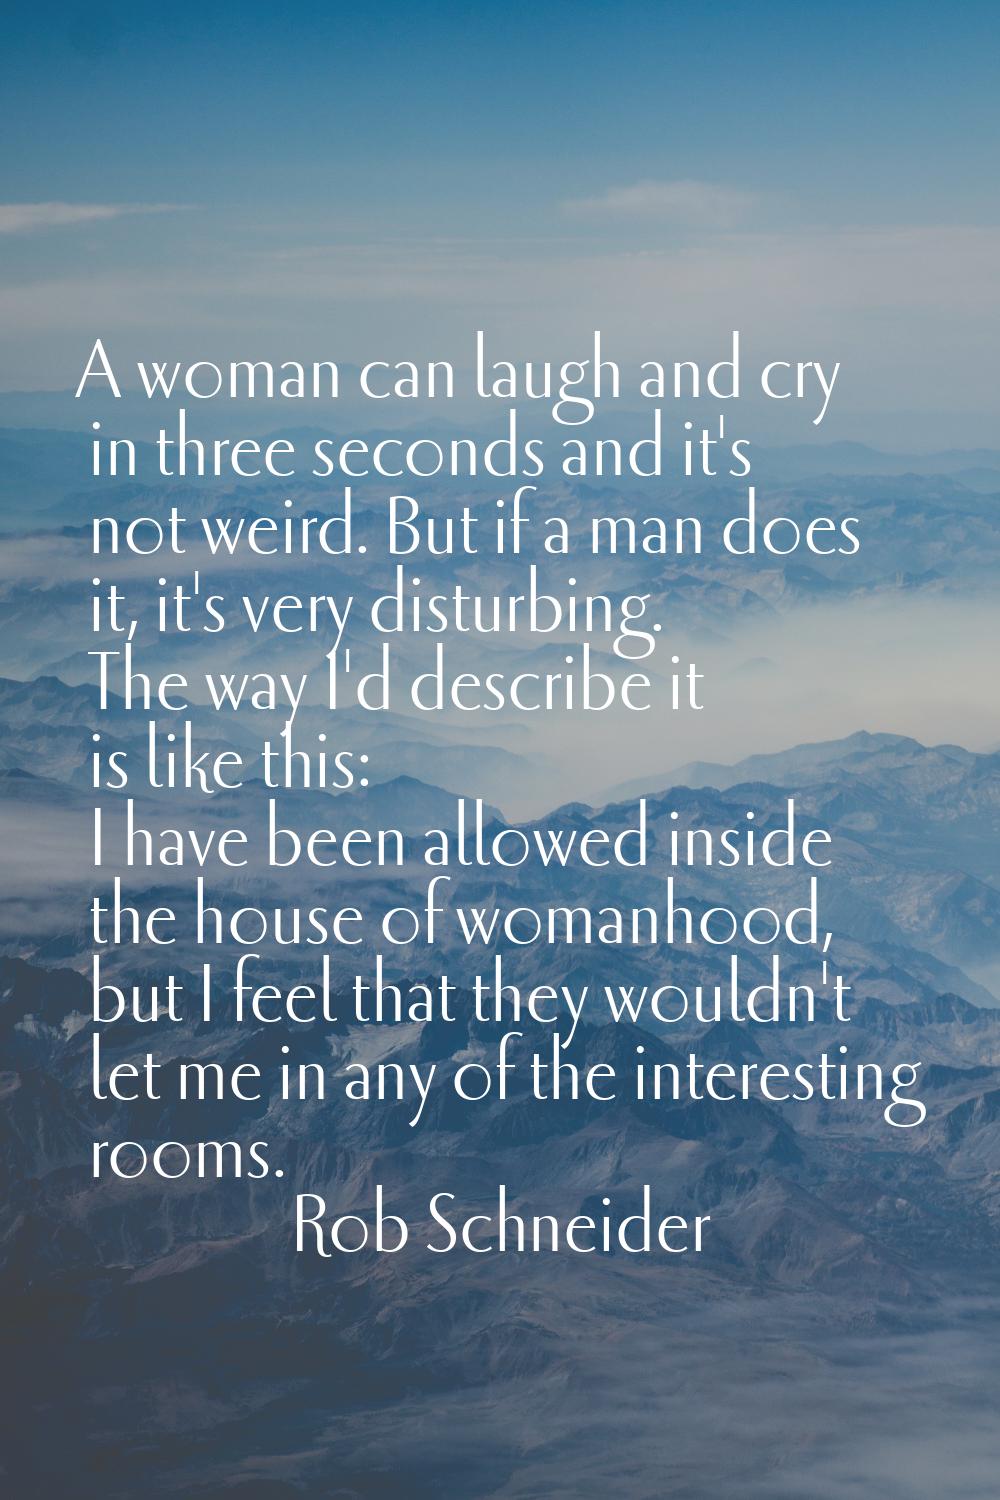 A woman can laugh and cry in three seconds and it's not weird. But if a man does it, it's very dist